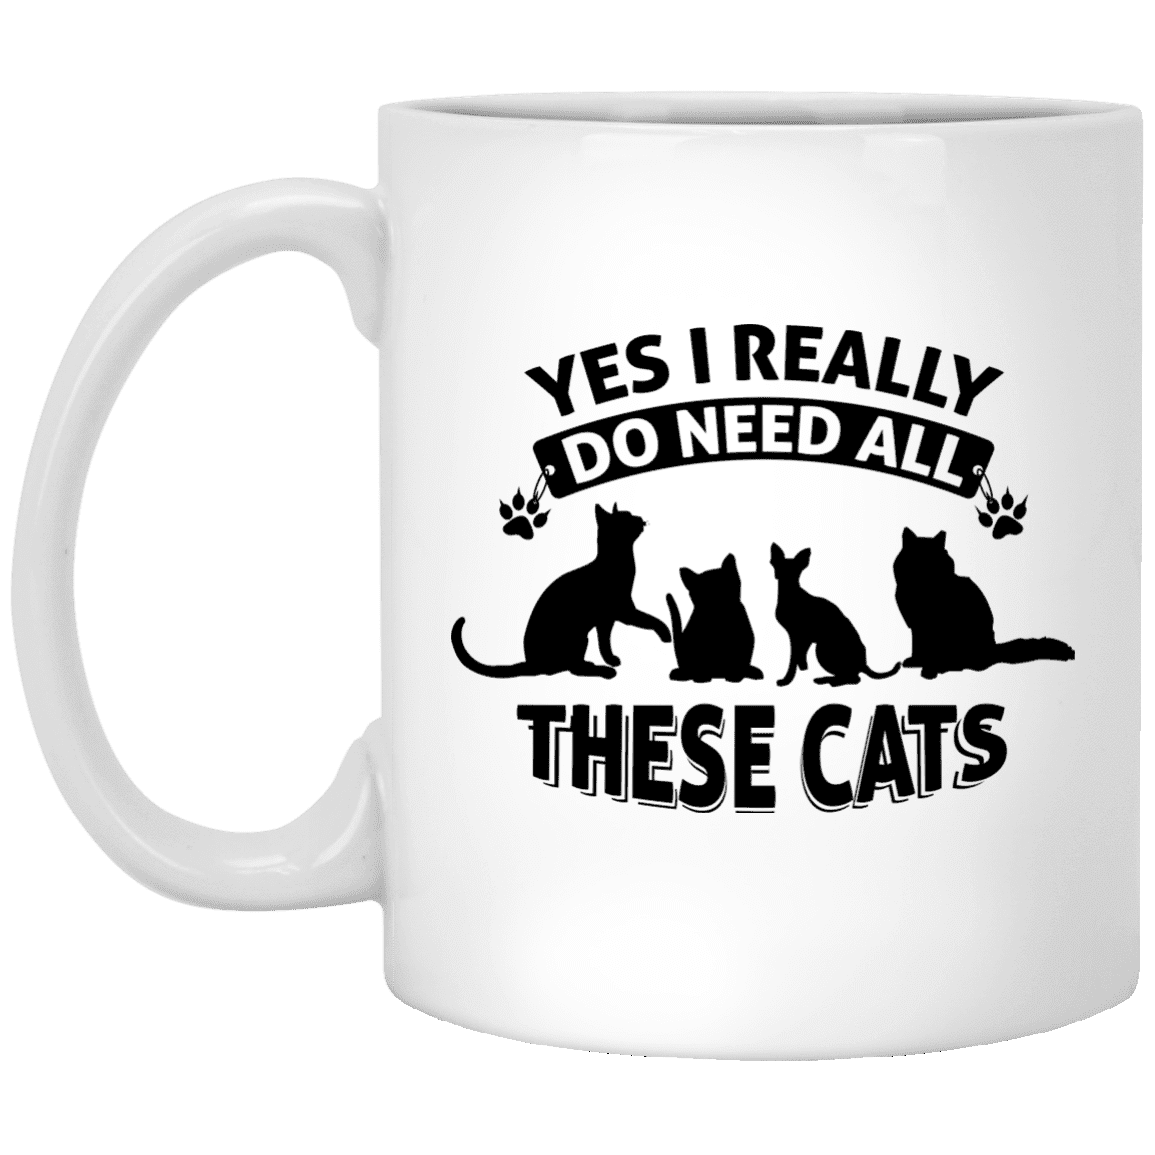 Yes I Need All These Cats - Mugs.